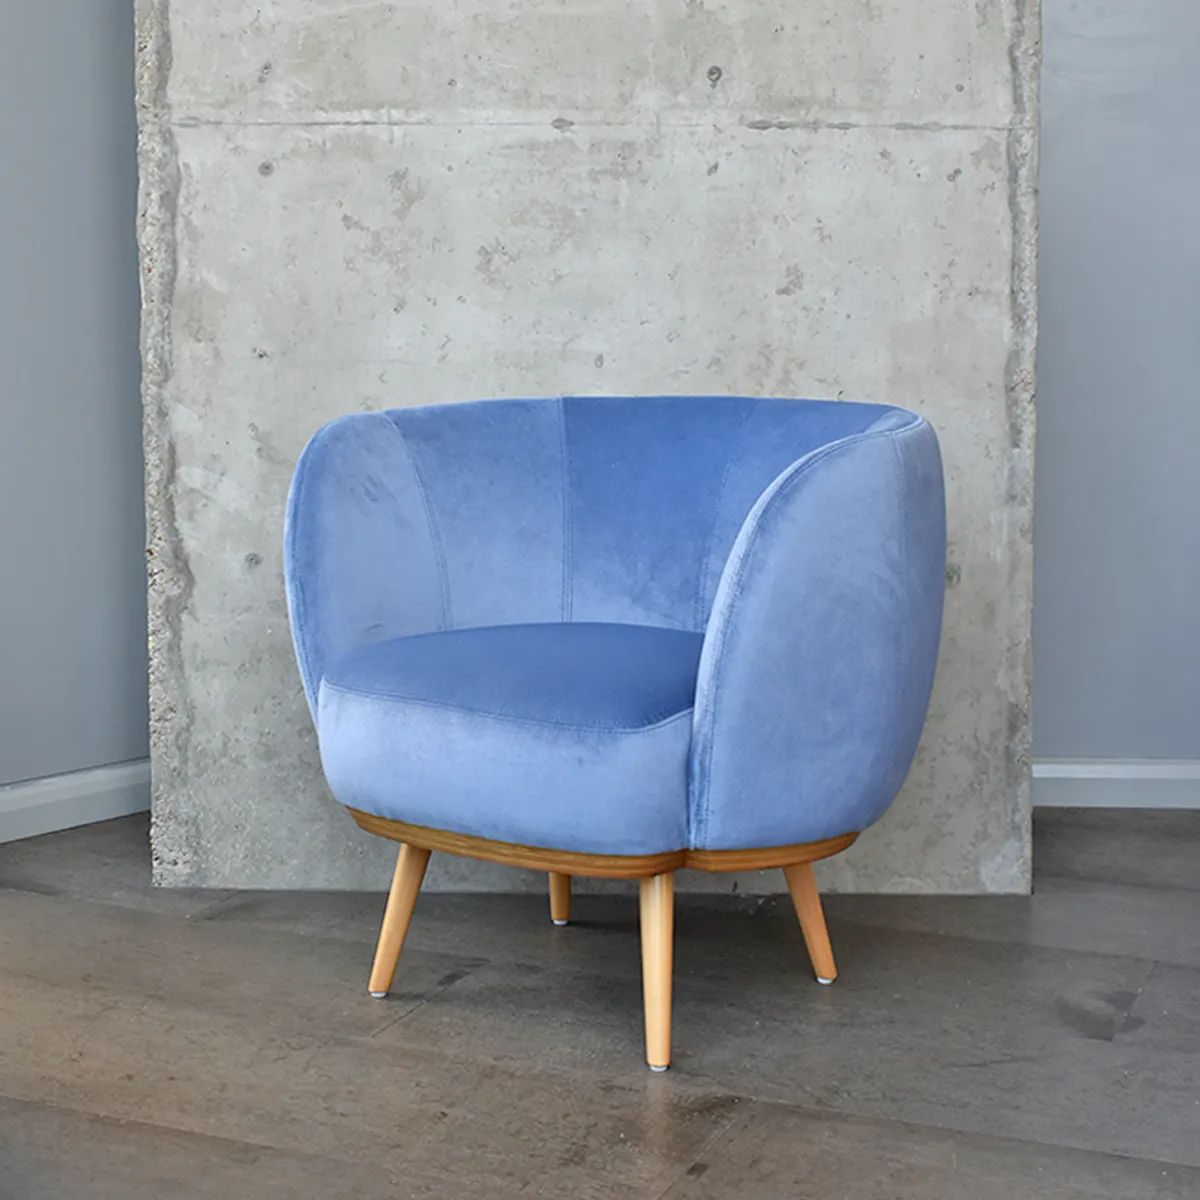 Cosmo Lounge Chair New Furniture From Milan 2019 By Inside Out Contracts 020